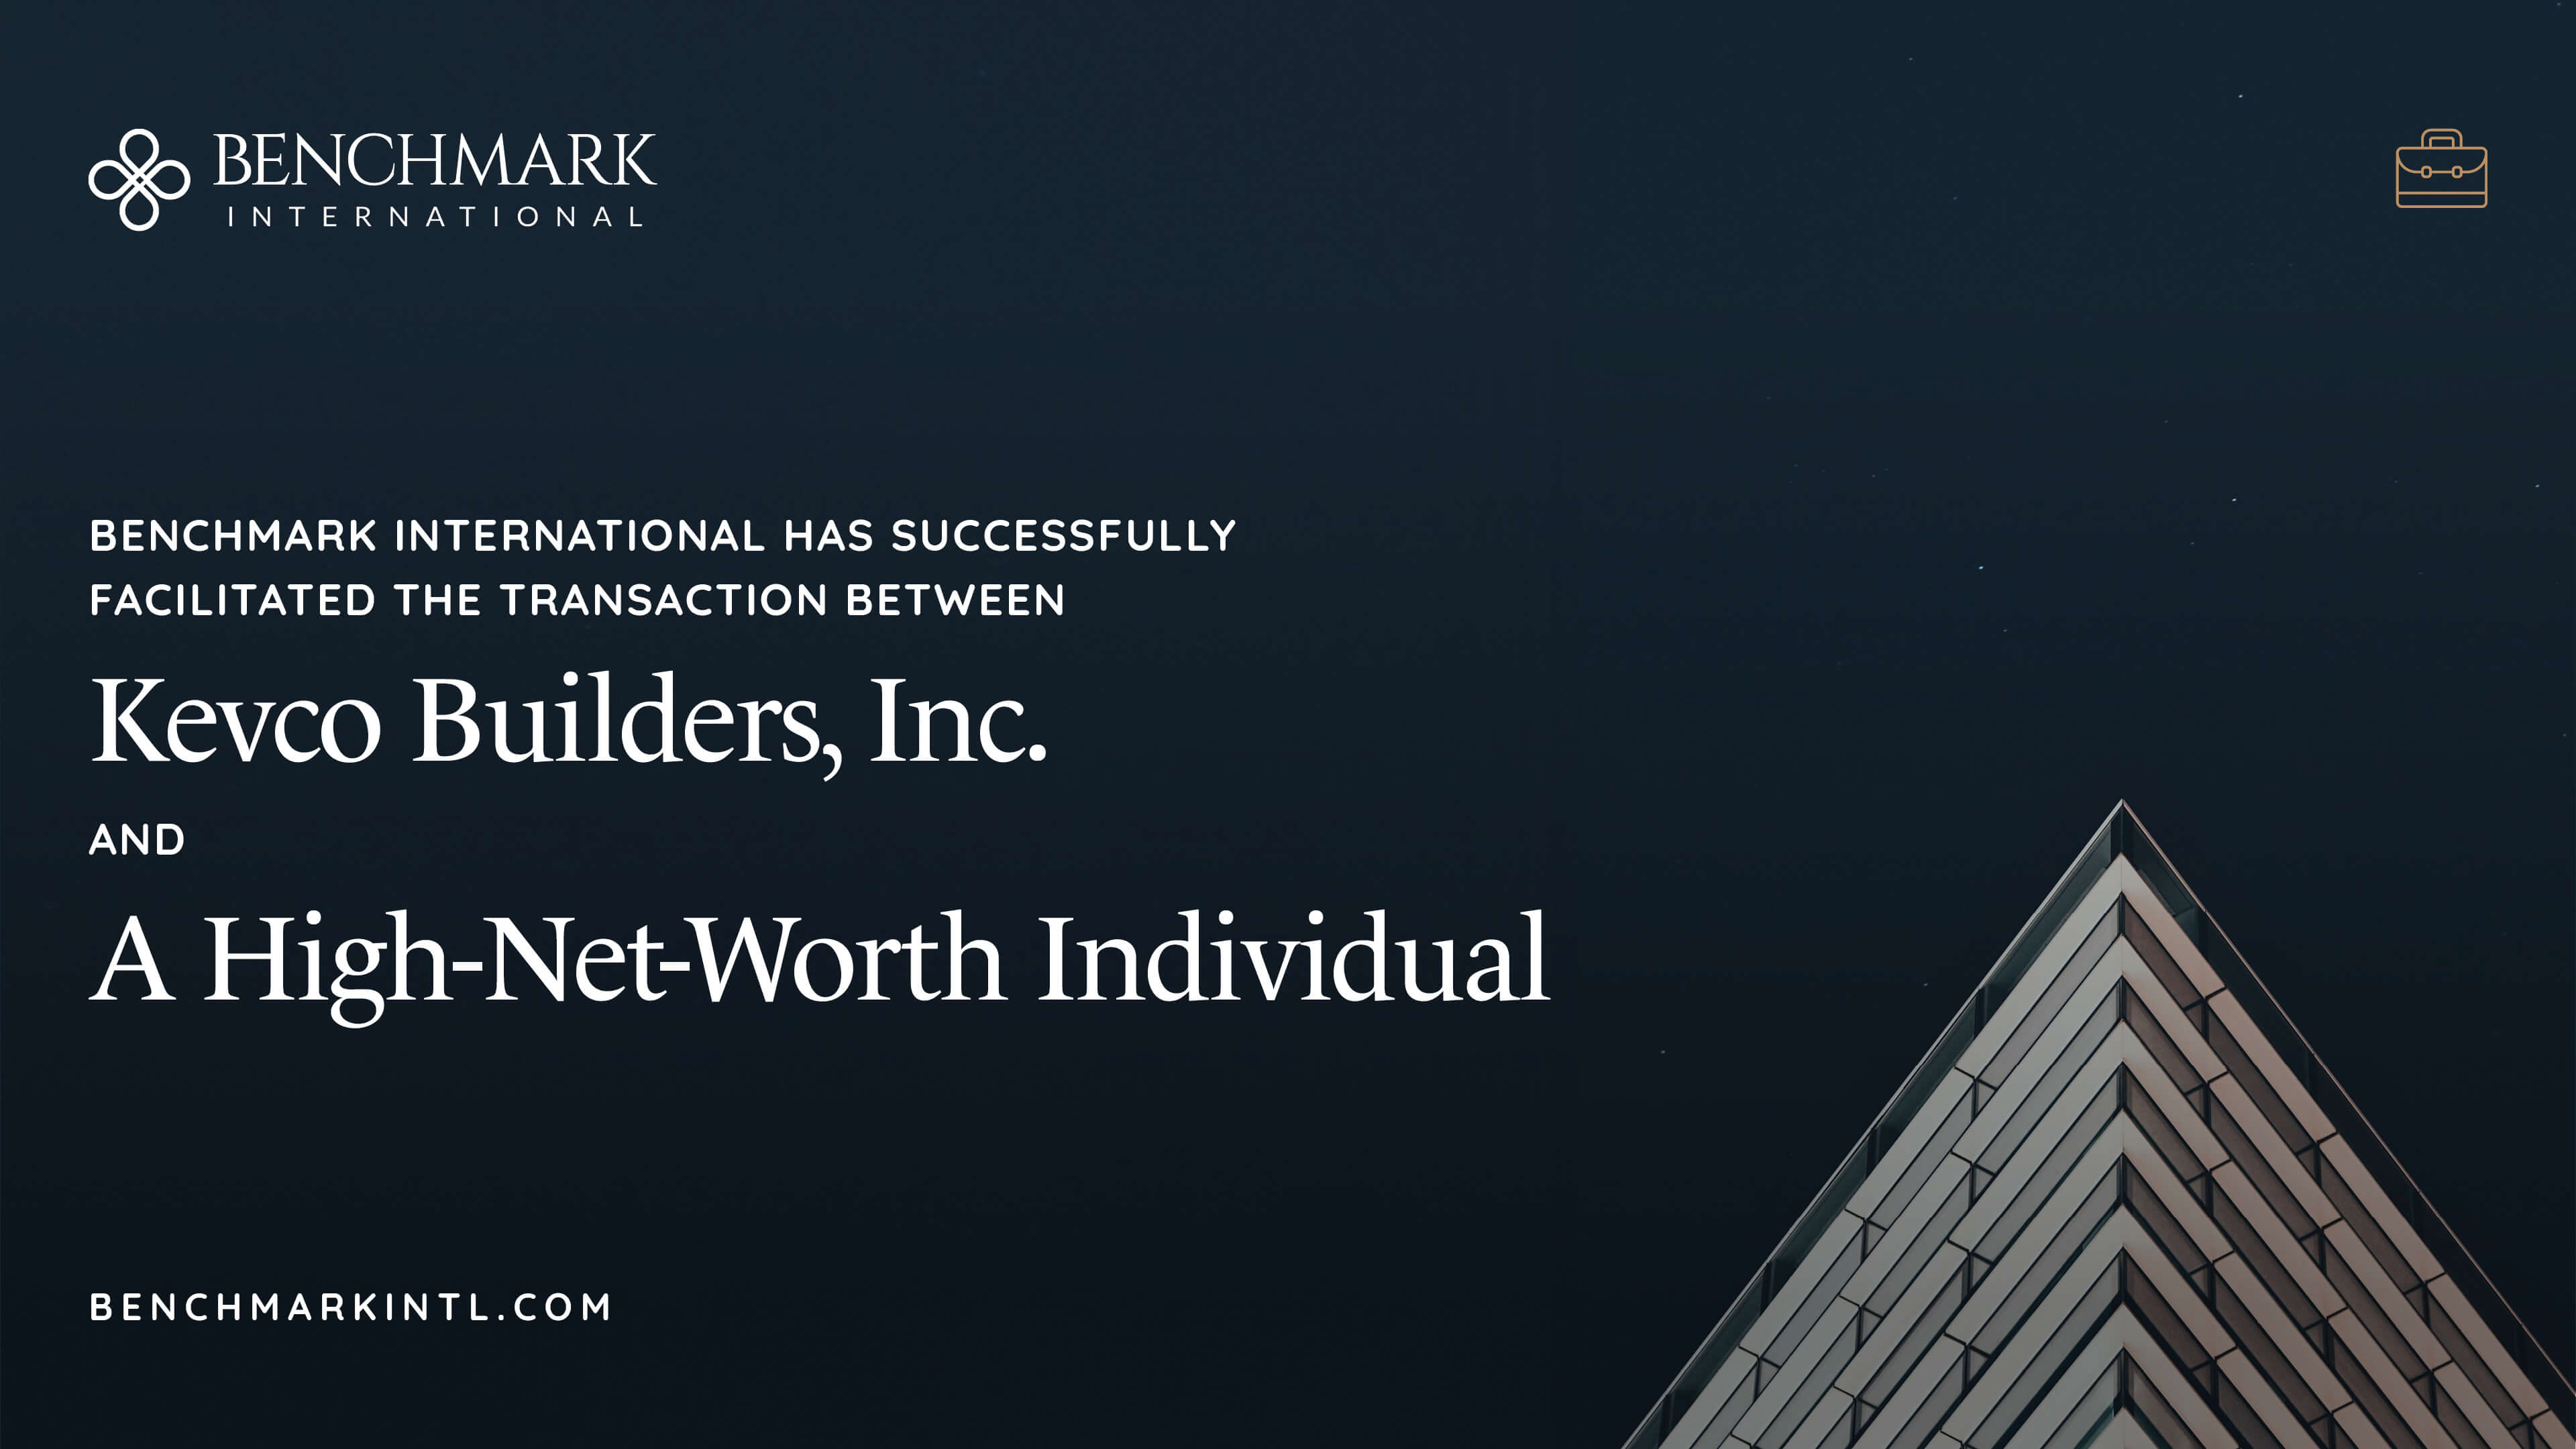 Benchmark International successfully facilitated the transaction between Kevco Builders, Inc. And A High-Net-Worth Individual.